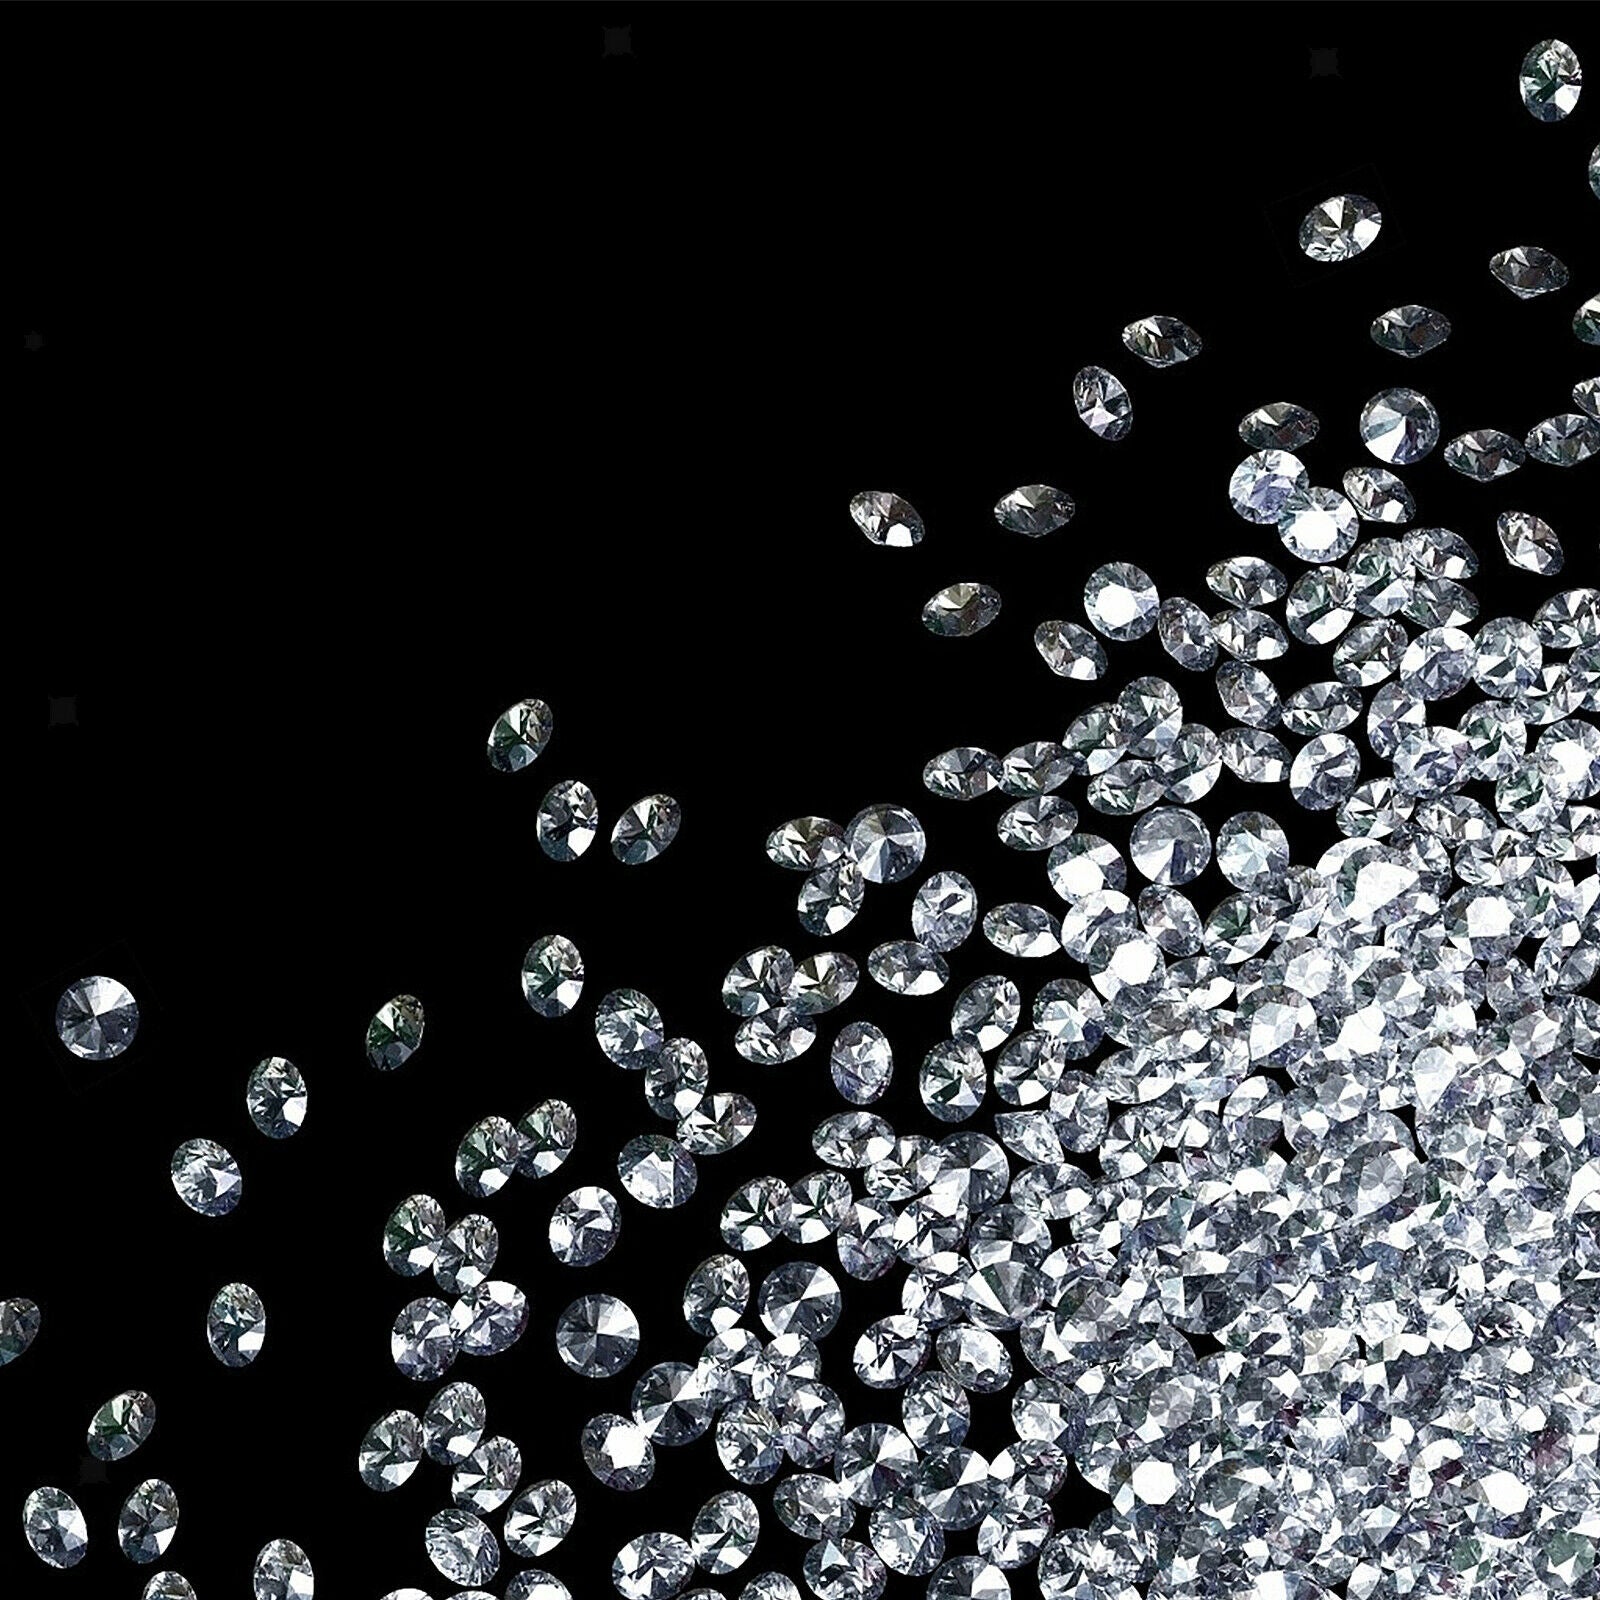 5000pcs 3mm Wedding Decorations Table Scatter Crystals Diamond Acrylic Confetti